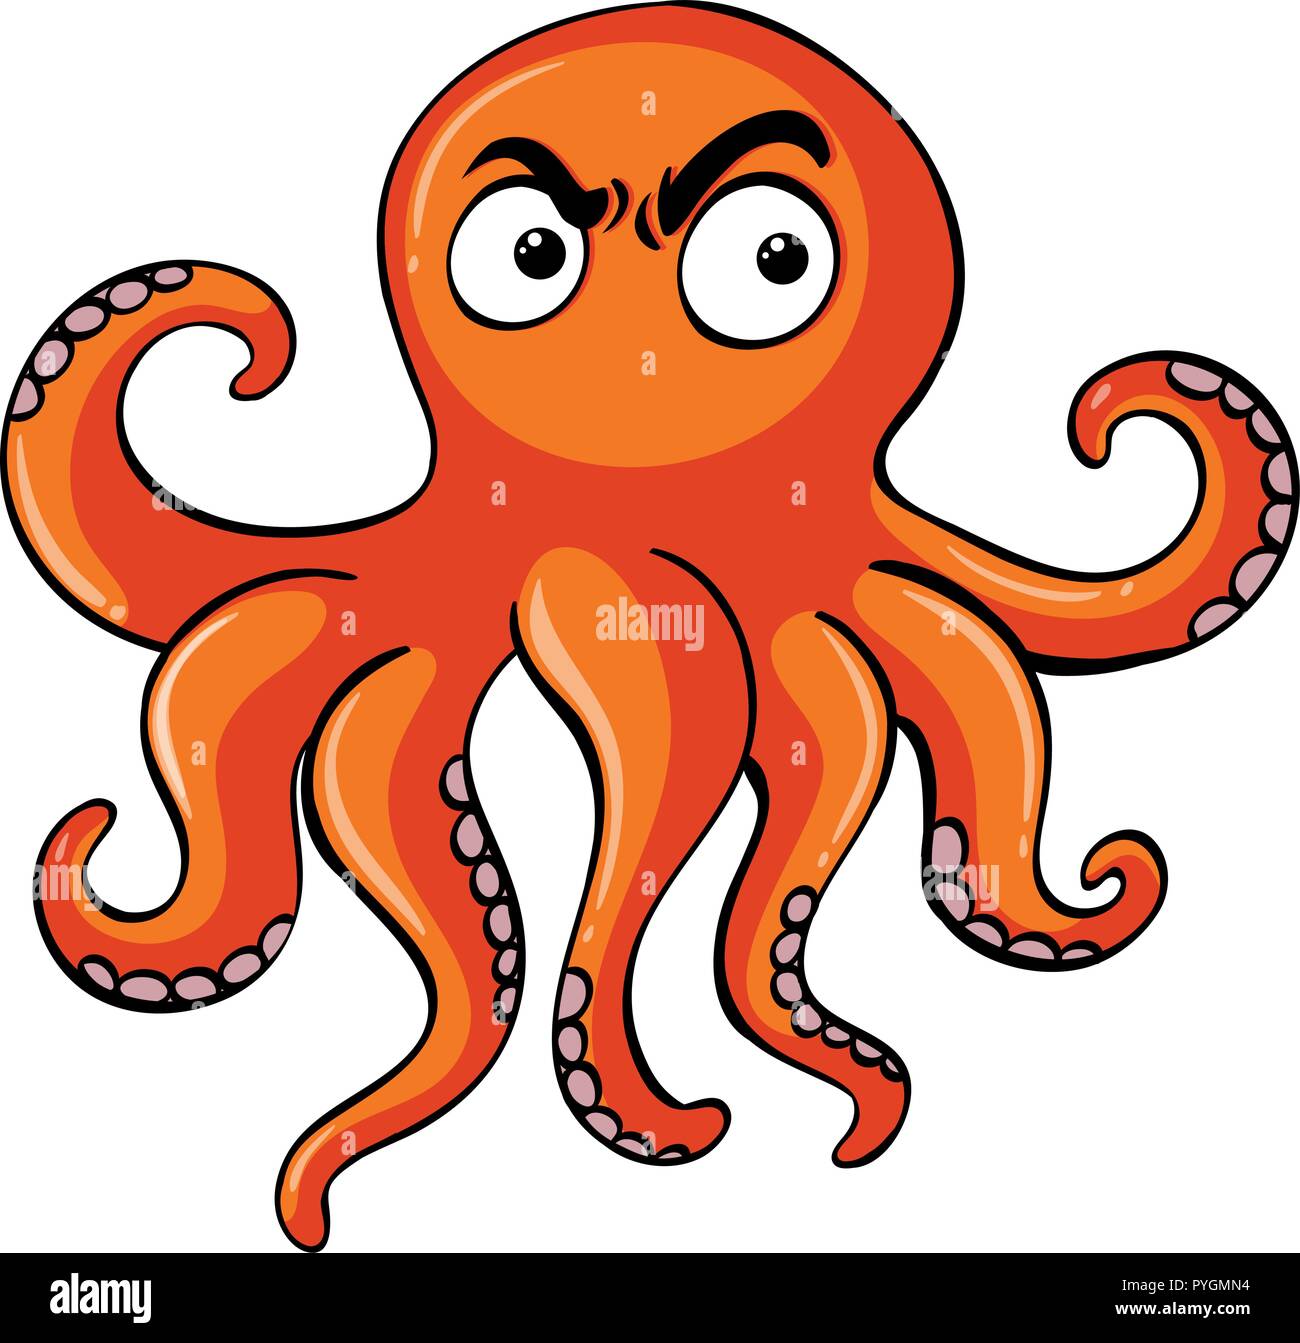 Orange octopus with angry face illustration Stock Vector